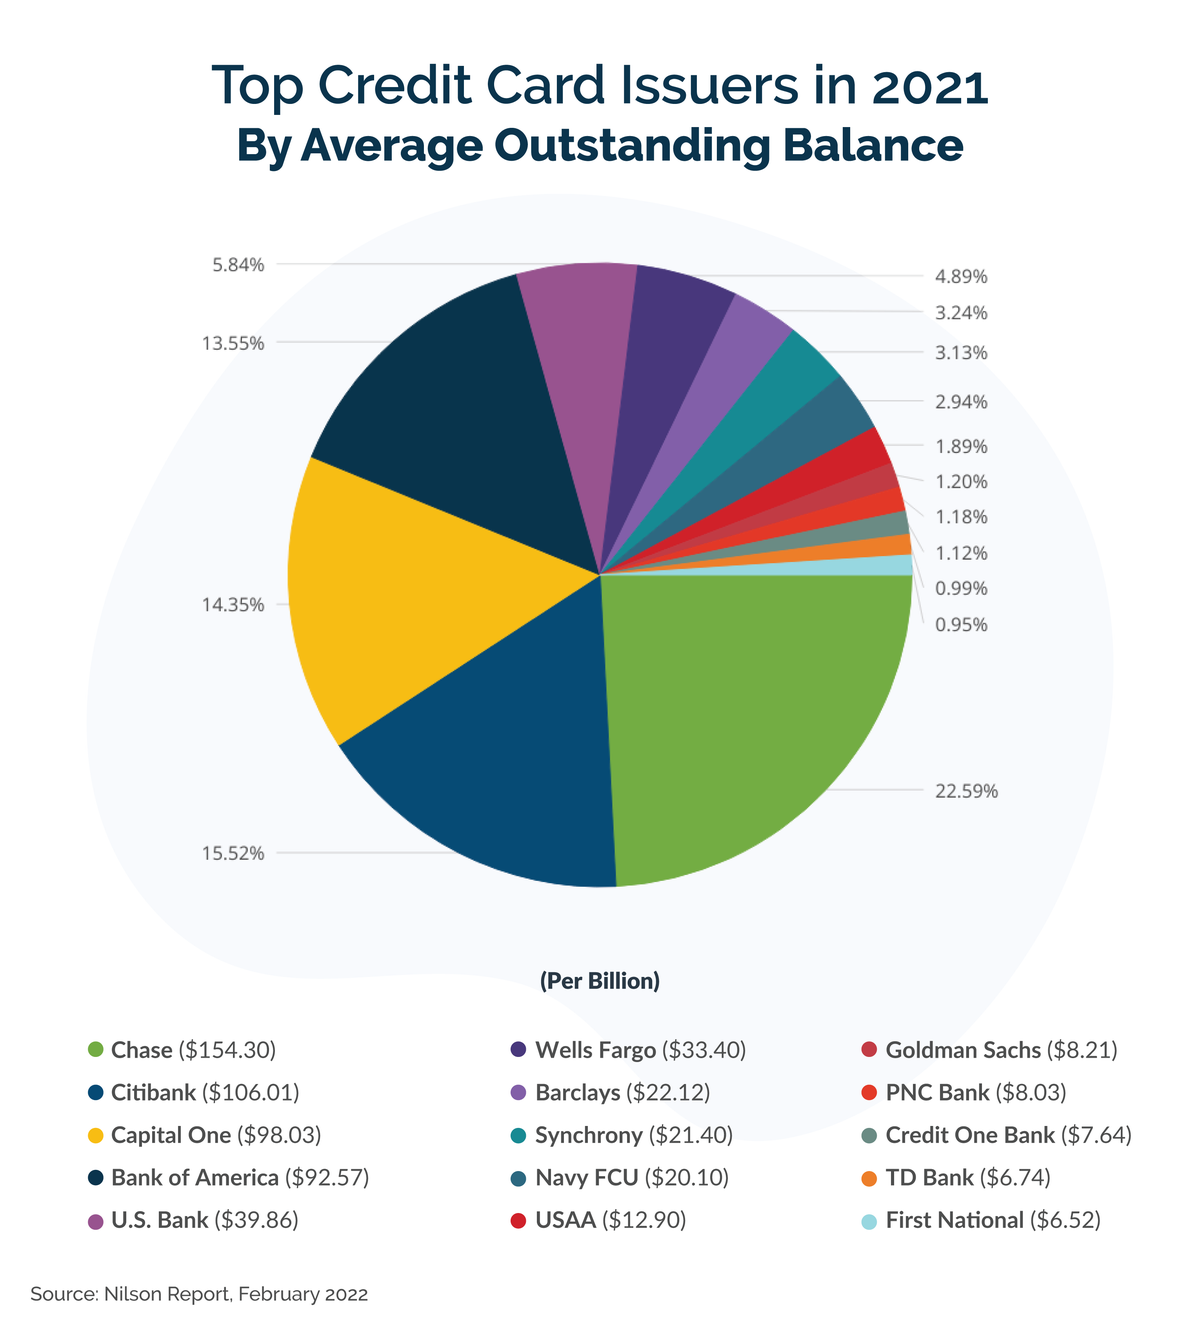 Top Credit Card Issuers by Average Outstanding Balance